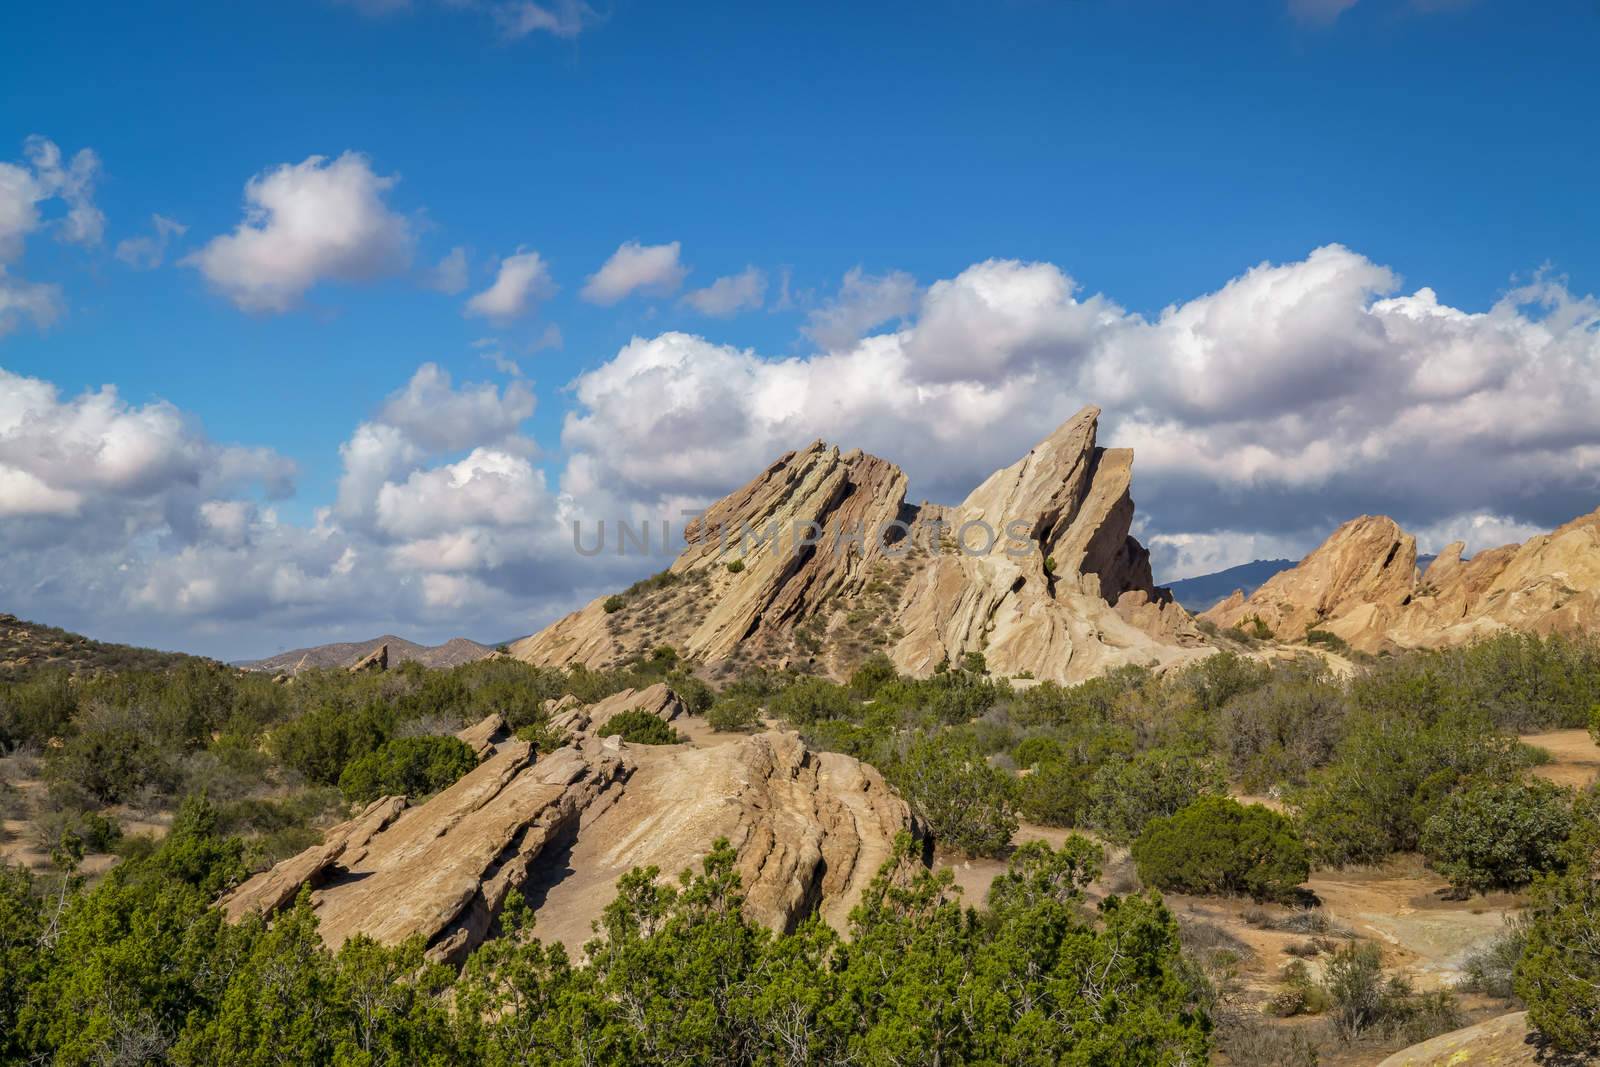  Vazquez Rocks Panorama by wolterk